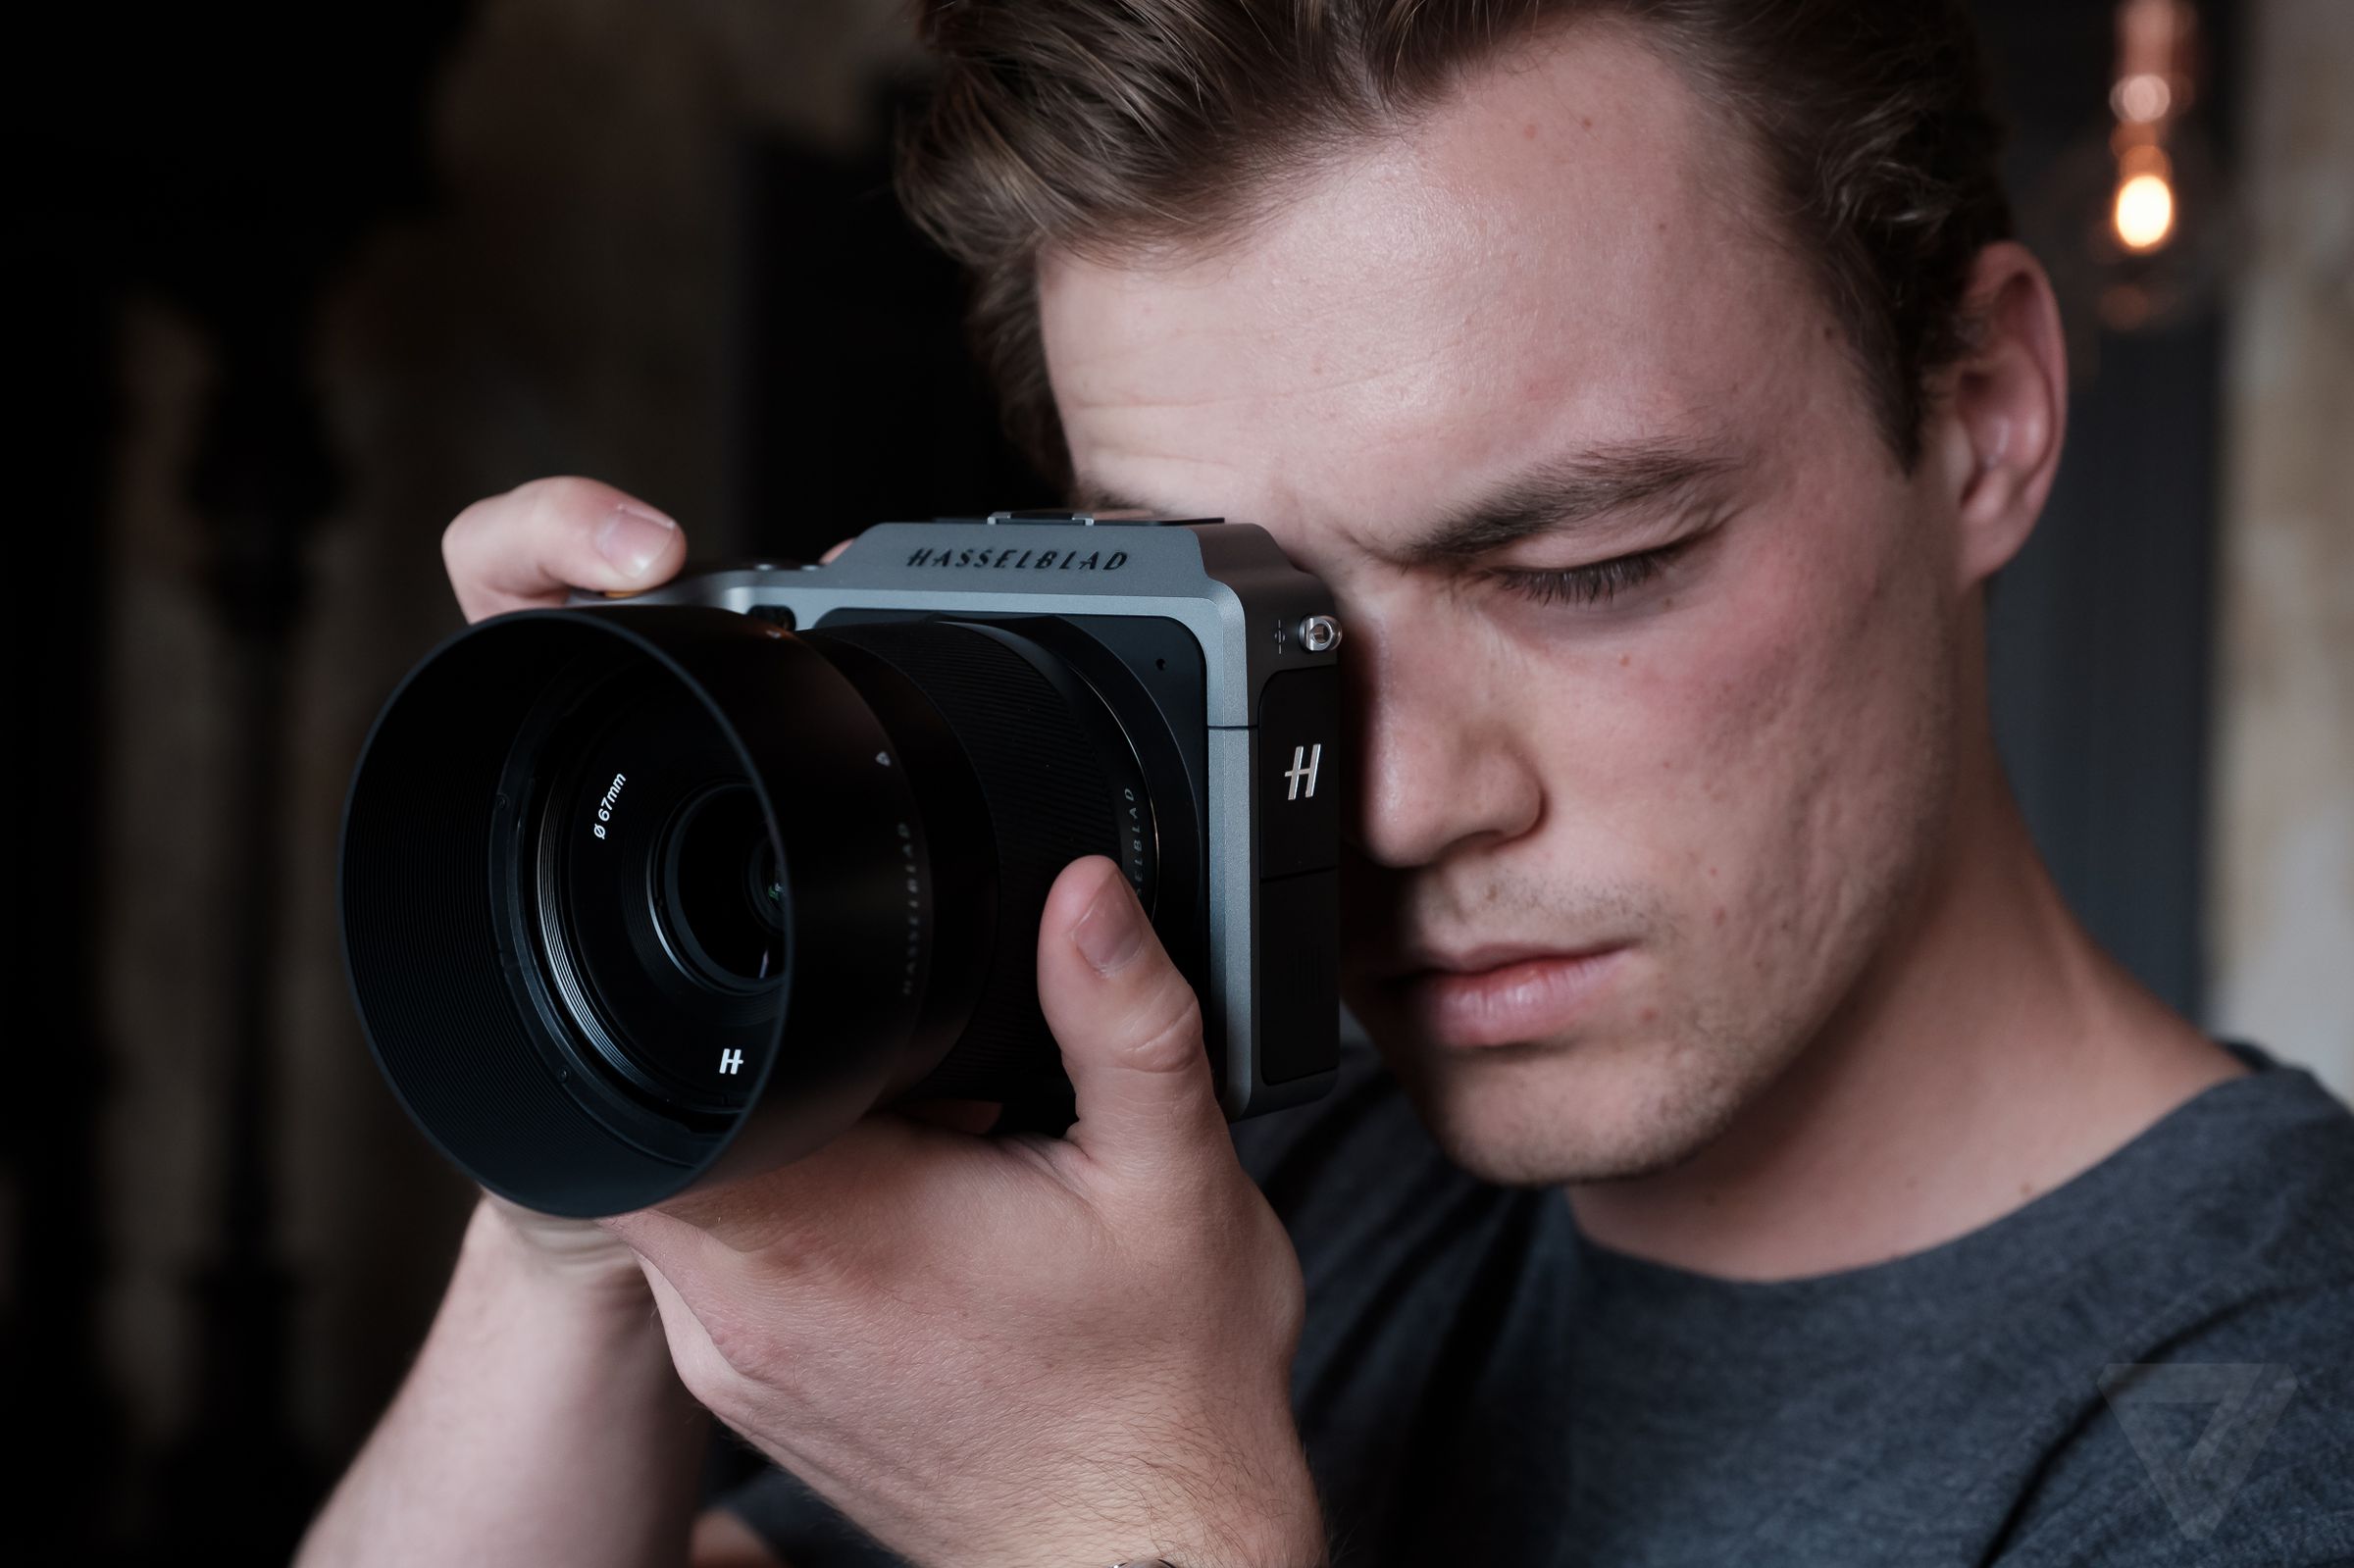 Hasselblad X1D hands on photos